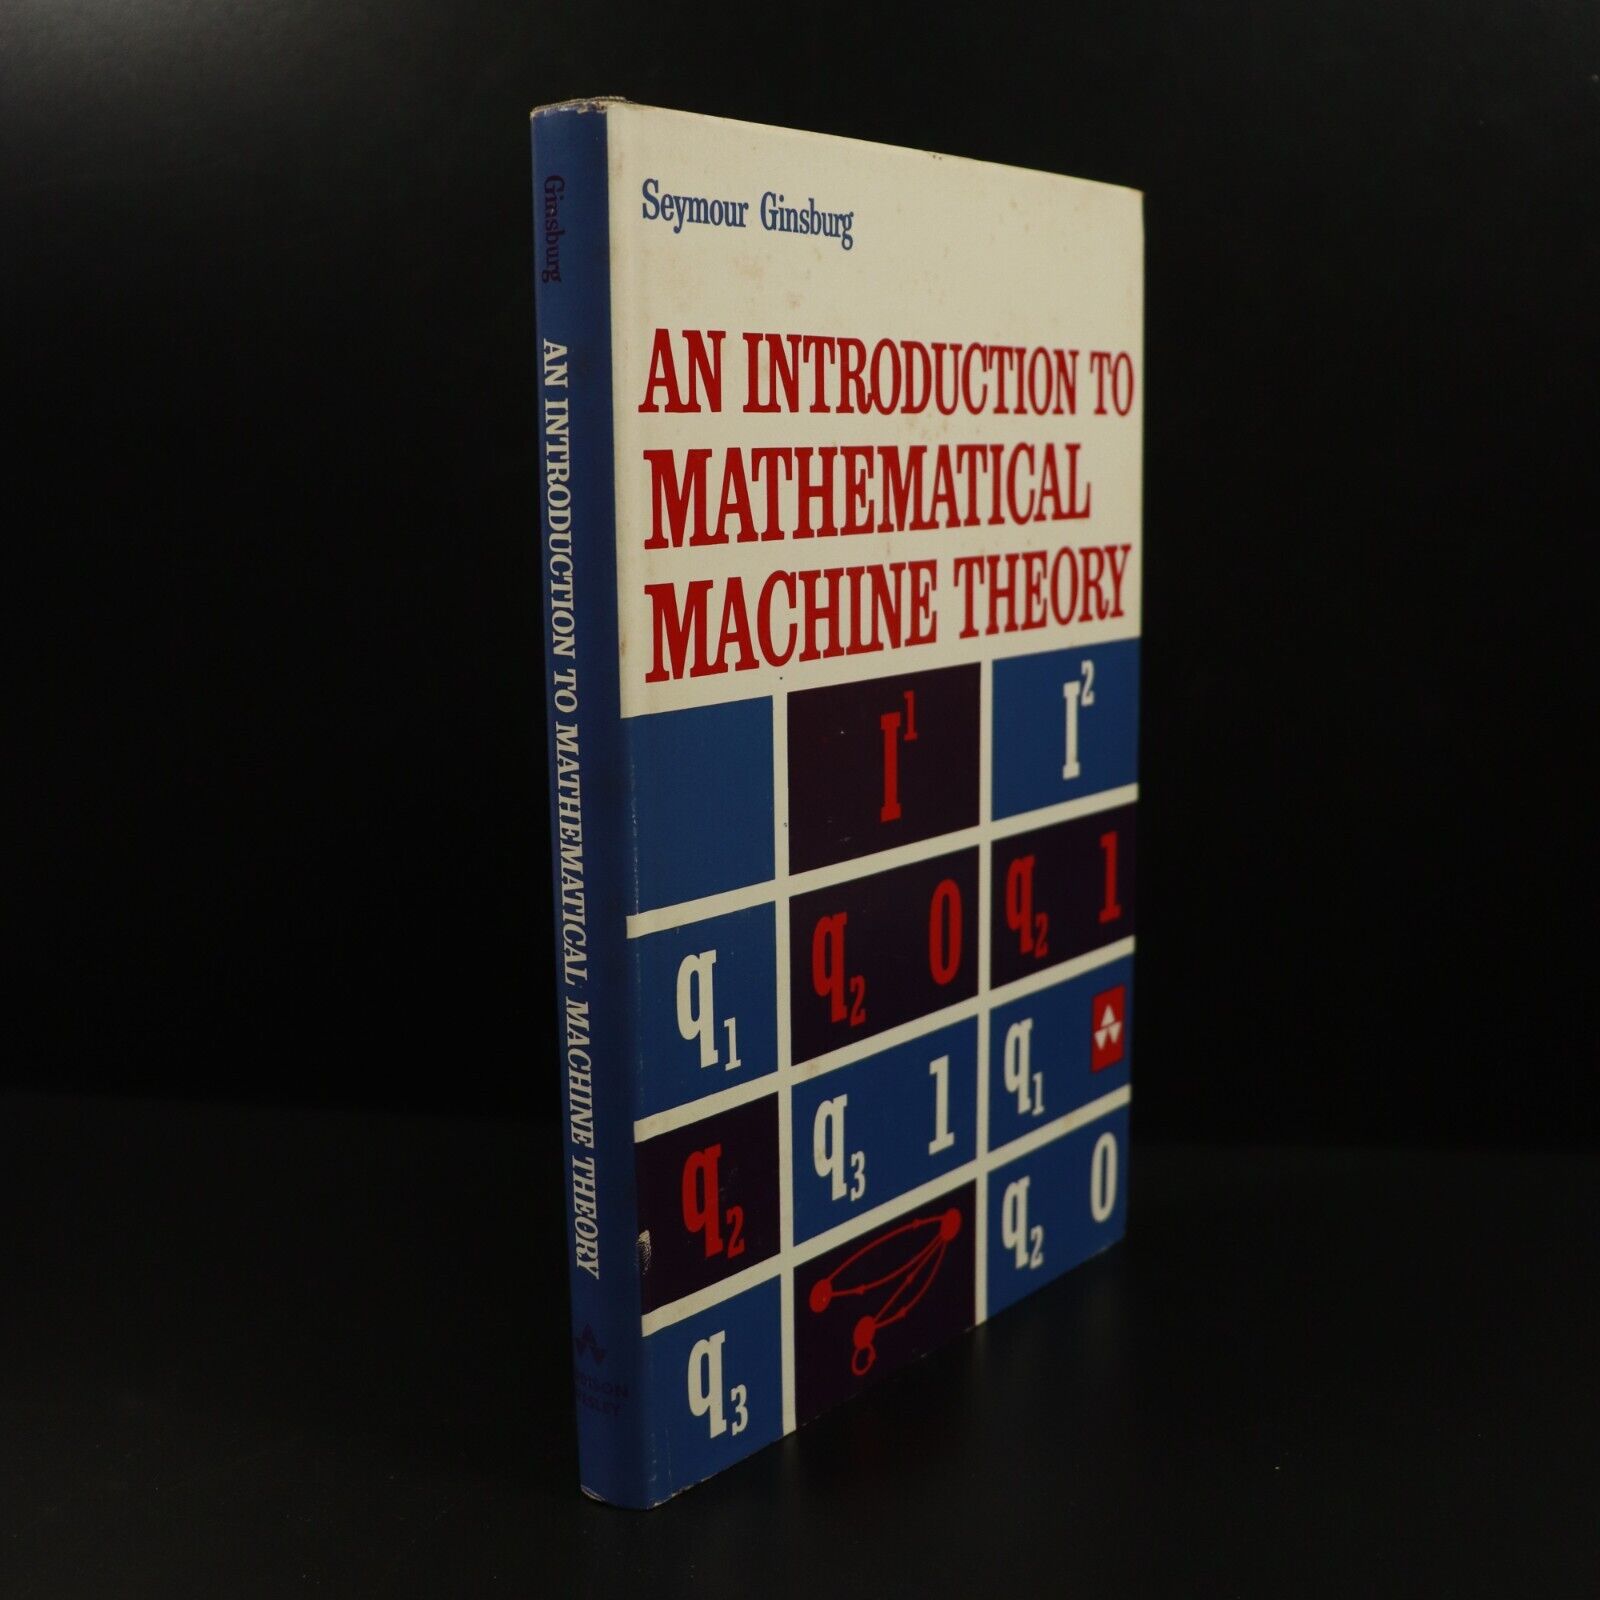 1962 Introduction To Mathematical Machine Theory by S. Ginsburg Science Book